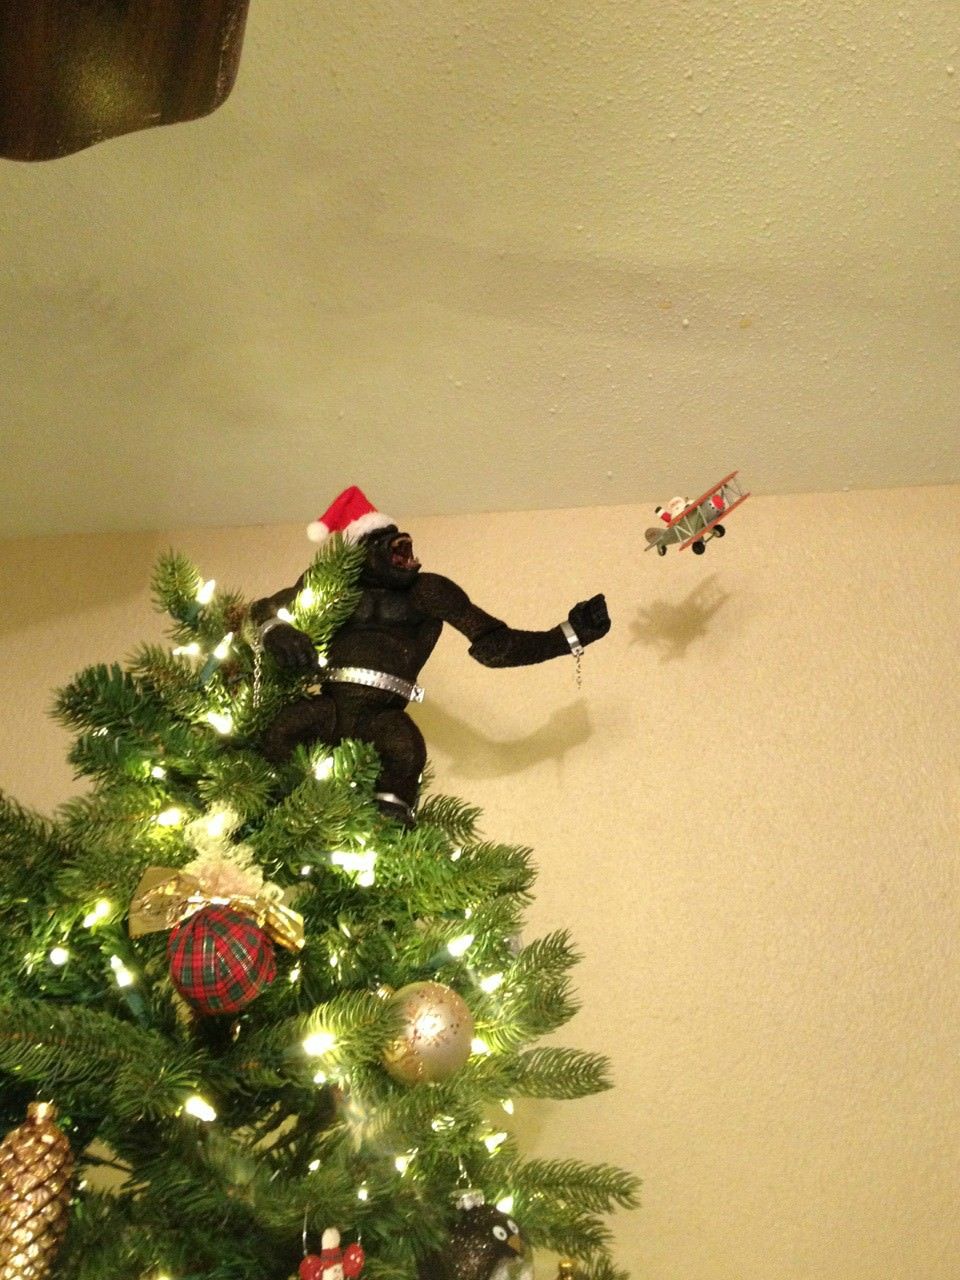 I told my fiancee that we needed to get a funny tree topper to offset the "adult" tree. He nailed it...